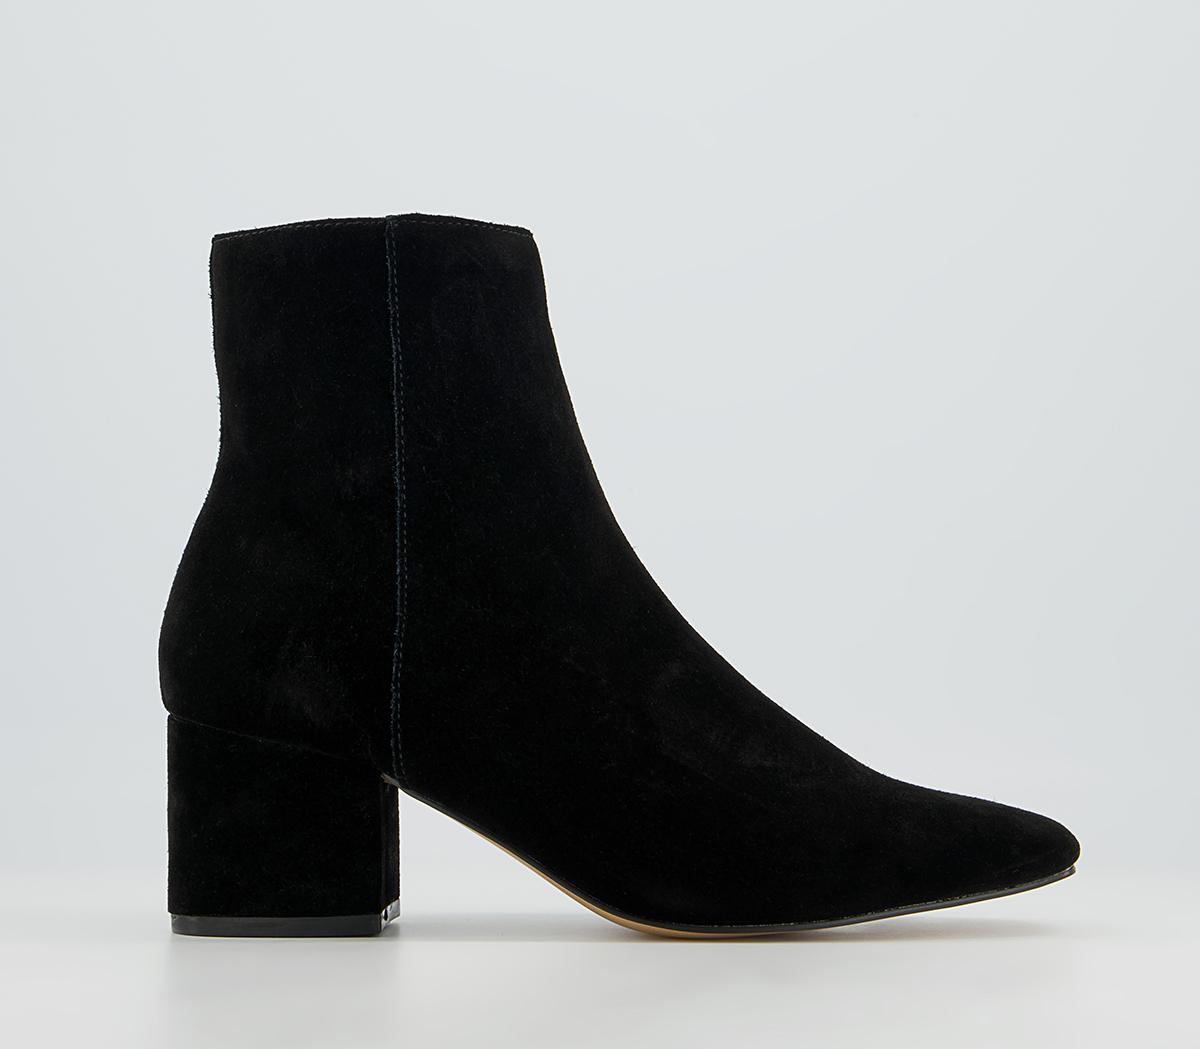 OFFICE Astrid Square Toe Mid Block Ankle Boots Black Suede - Women's ...